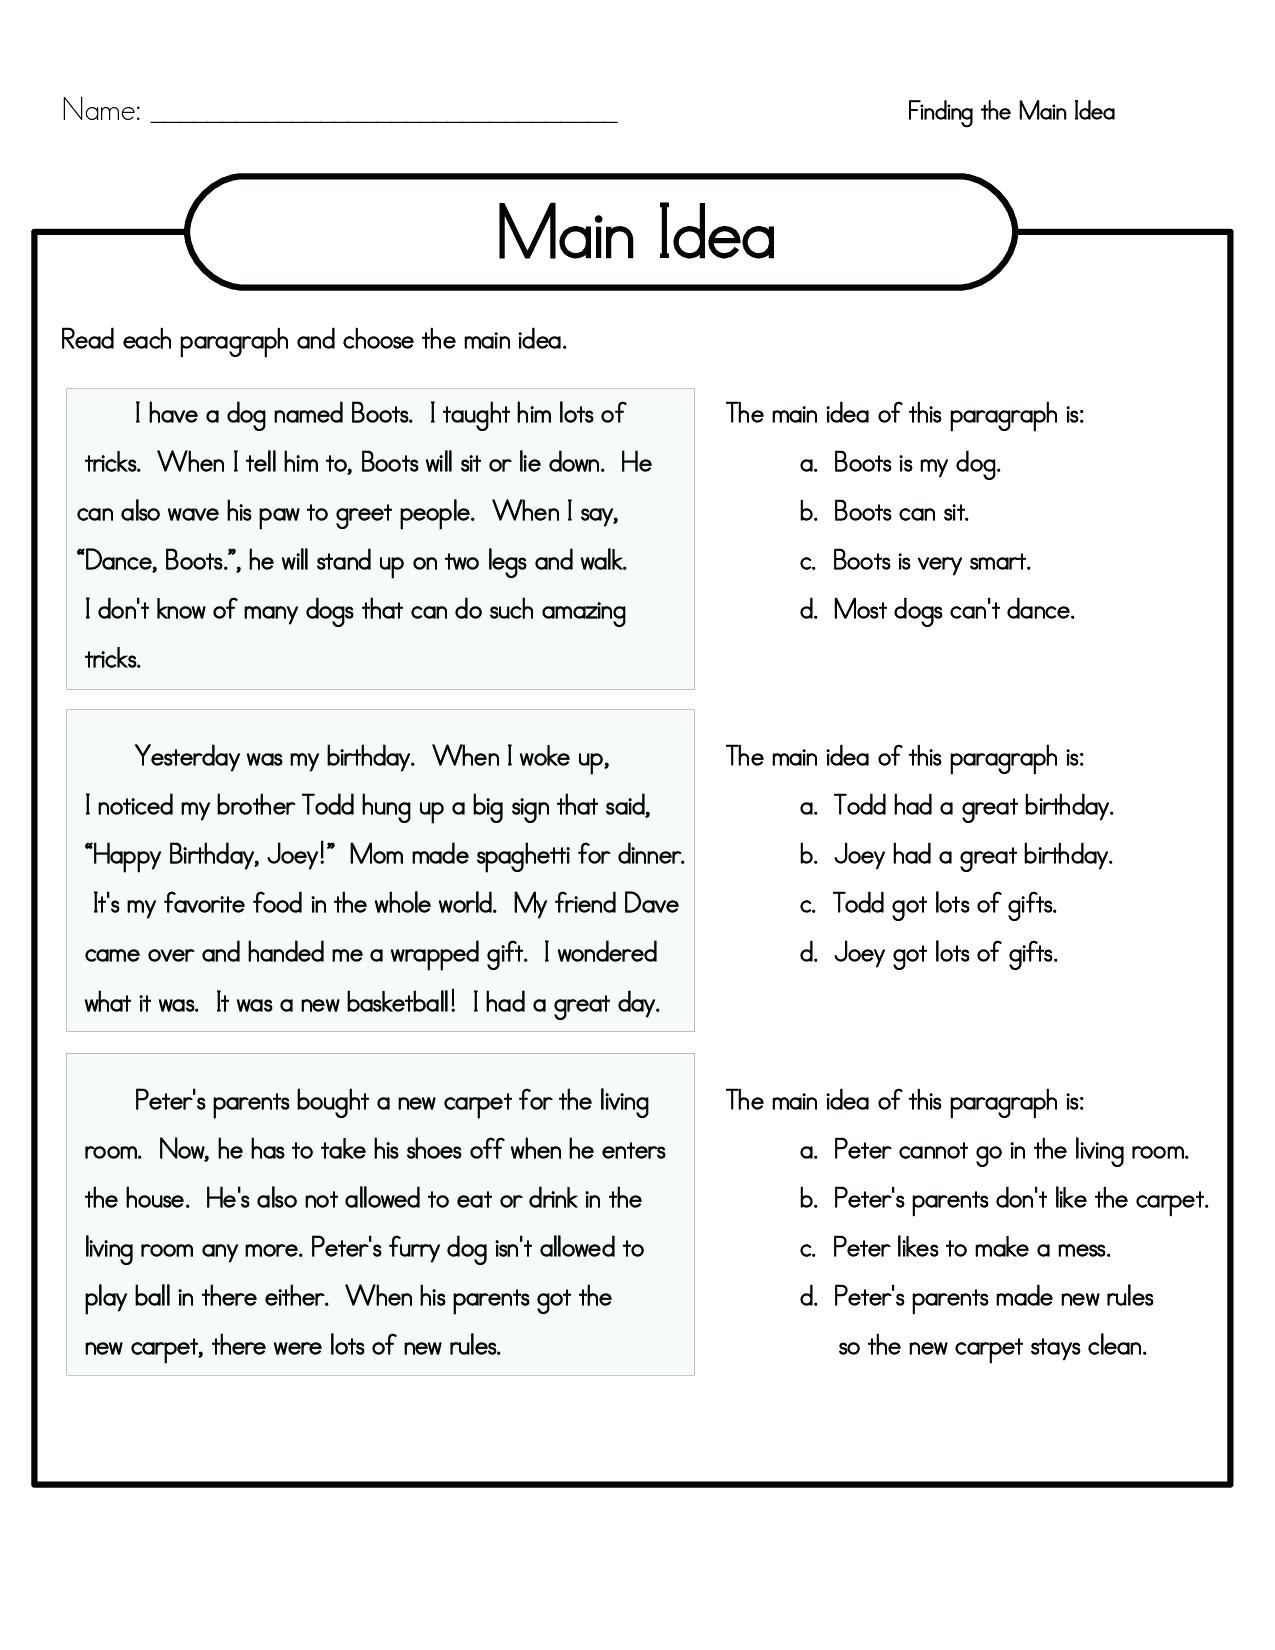 25th Grade Reading Comprehension Worksheets - Best Coloring Pages Throughout Main Idea Worksheet 4